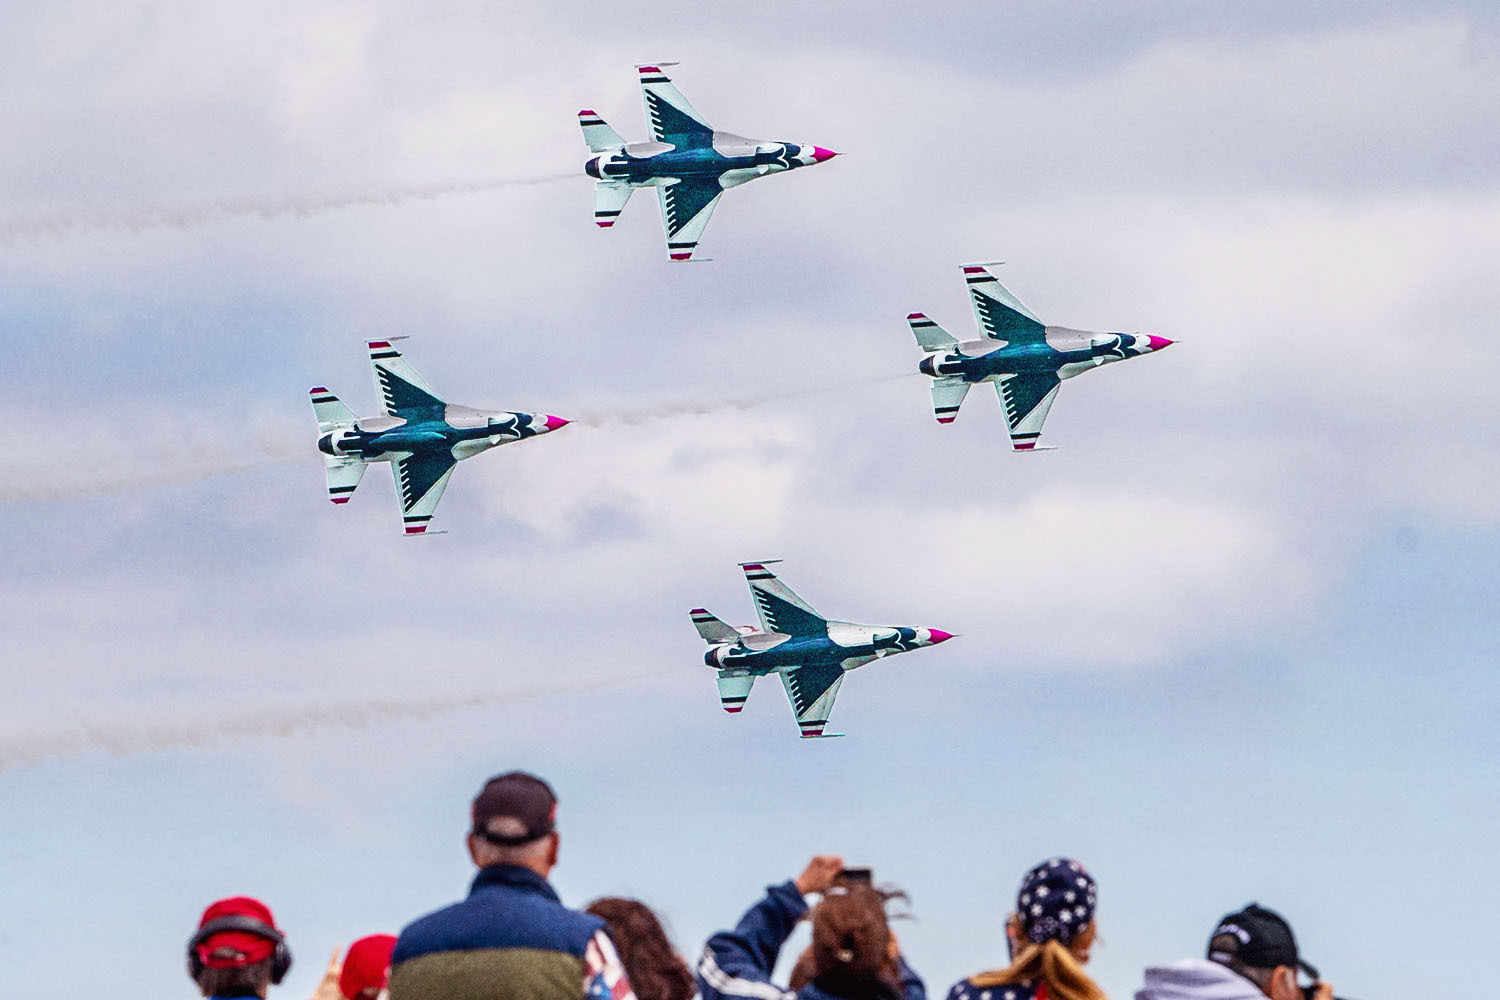 Air Shows Are a “Dangerous Proposition,” But the Appetite for Them Is Insatiable